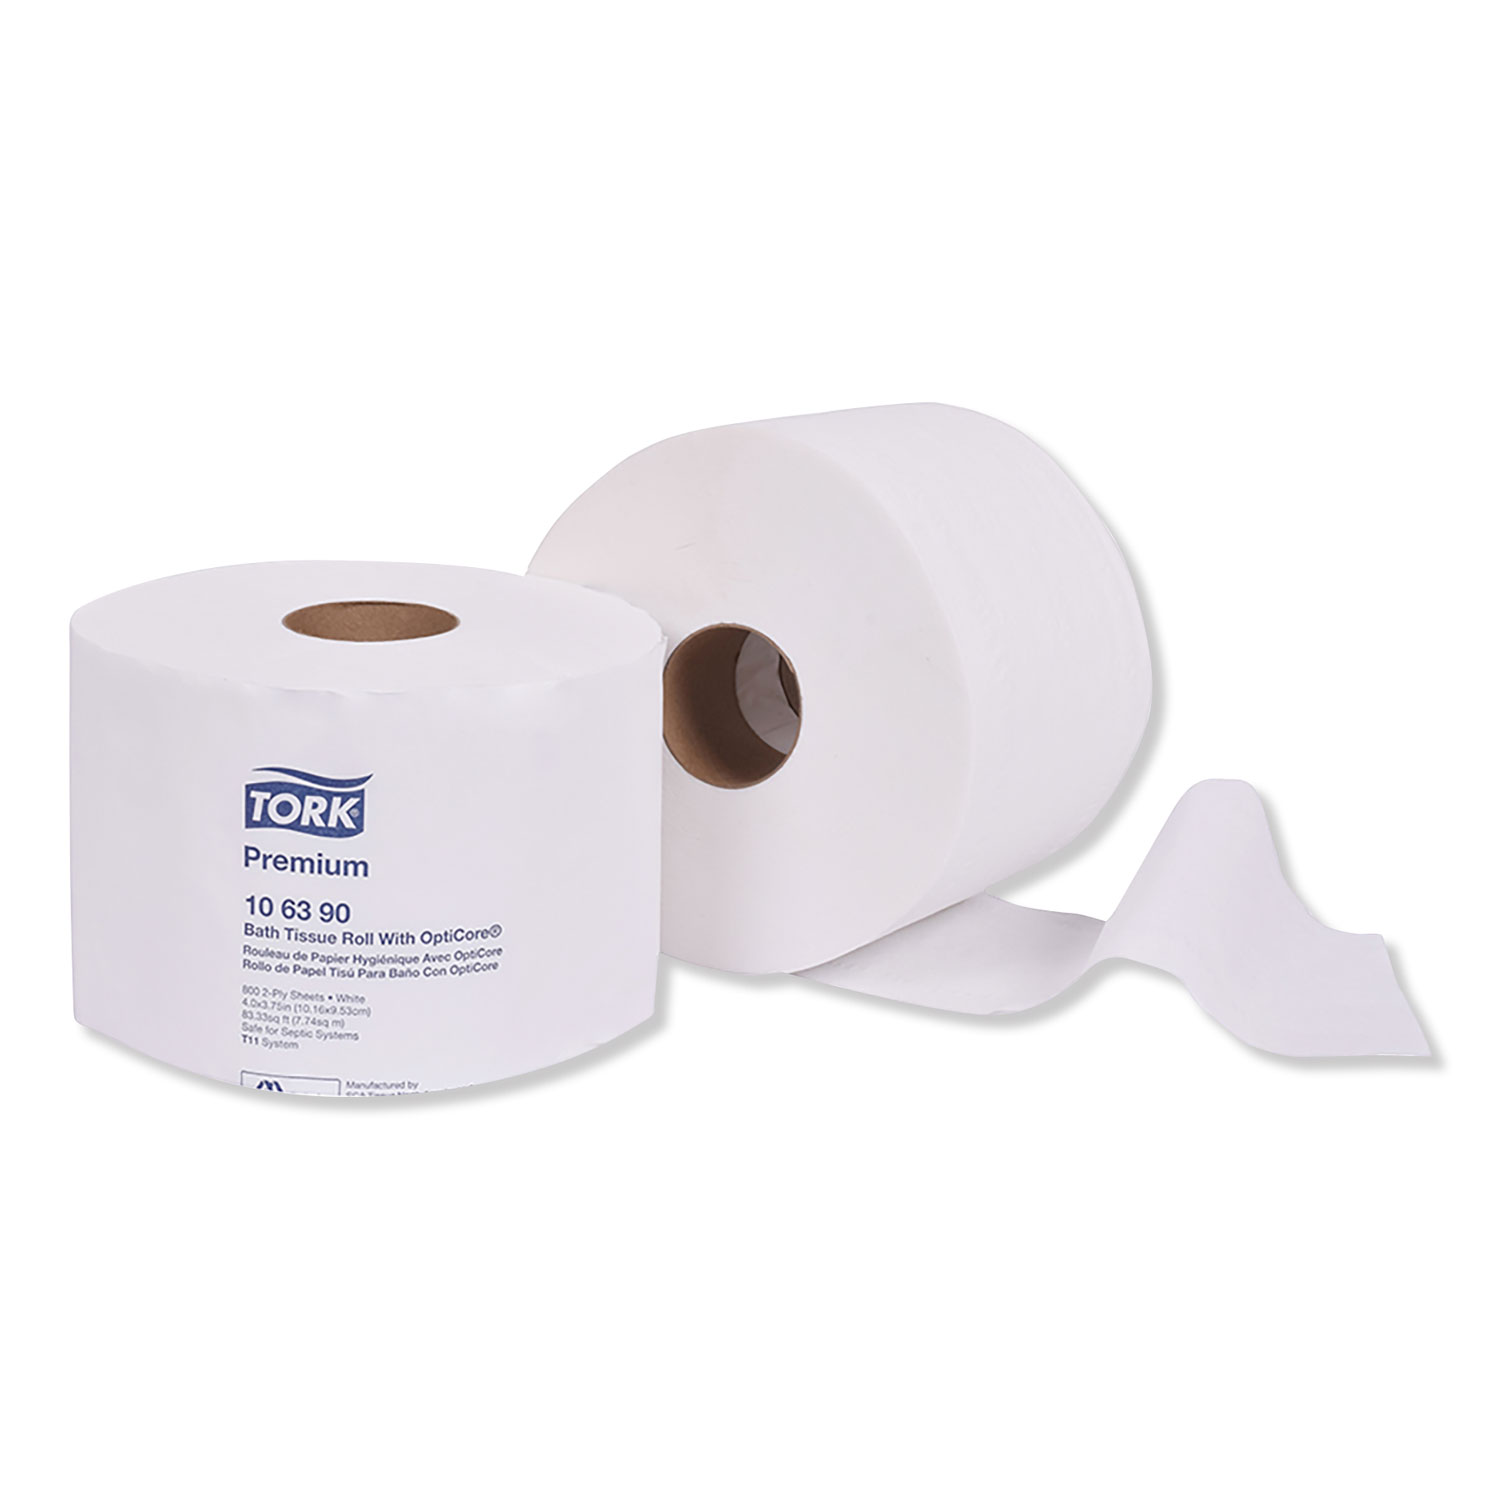  Tork 106390 Premium Bath Tissue Roll with OptiCore, Septic Safe, 2-Ply, White, 800 Sheets/Roll, 36/Carton (TRK106390) 